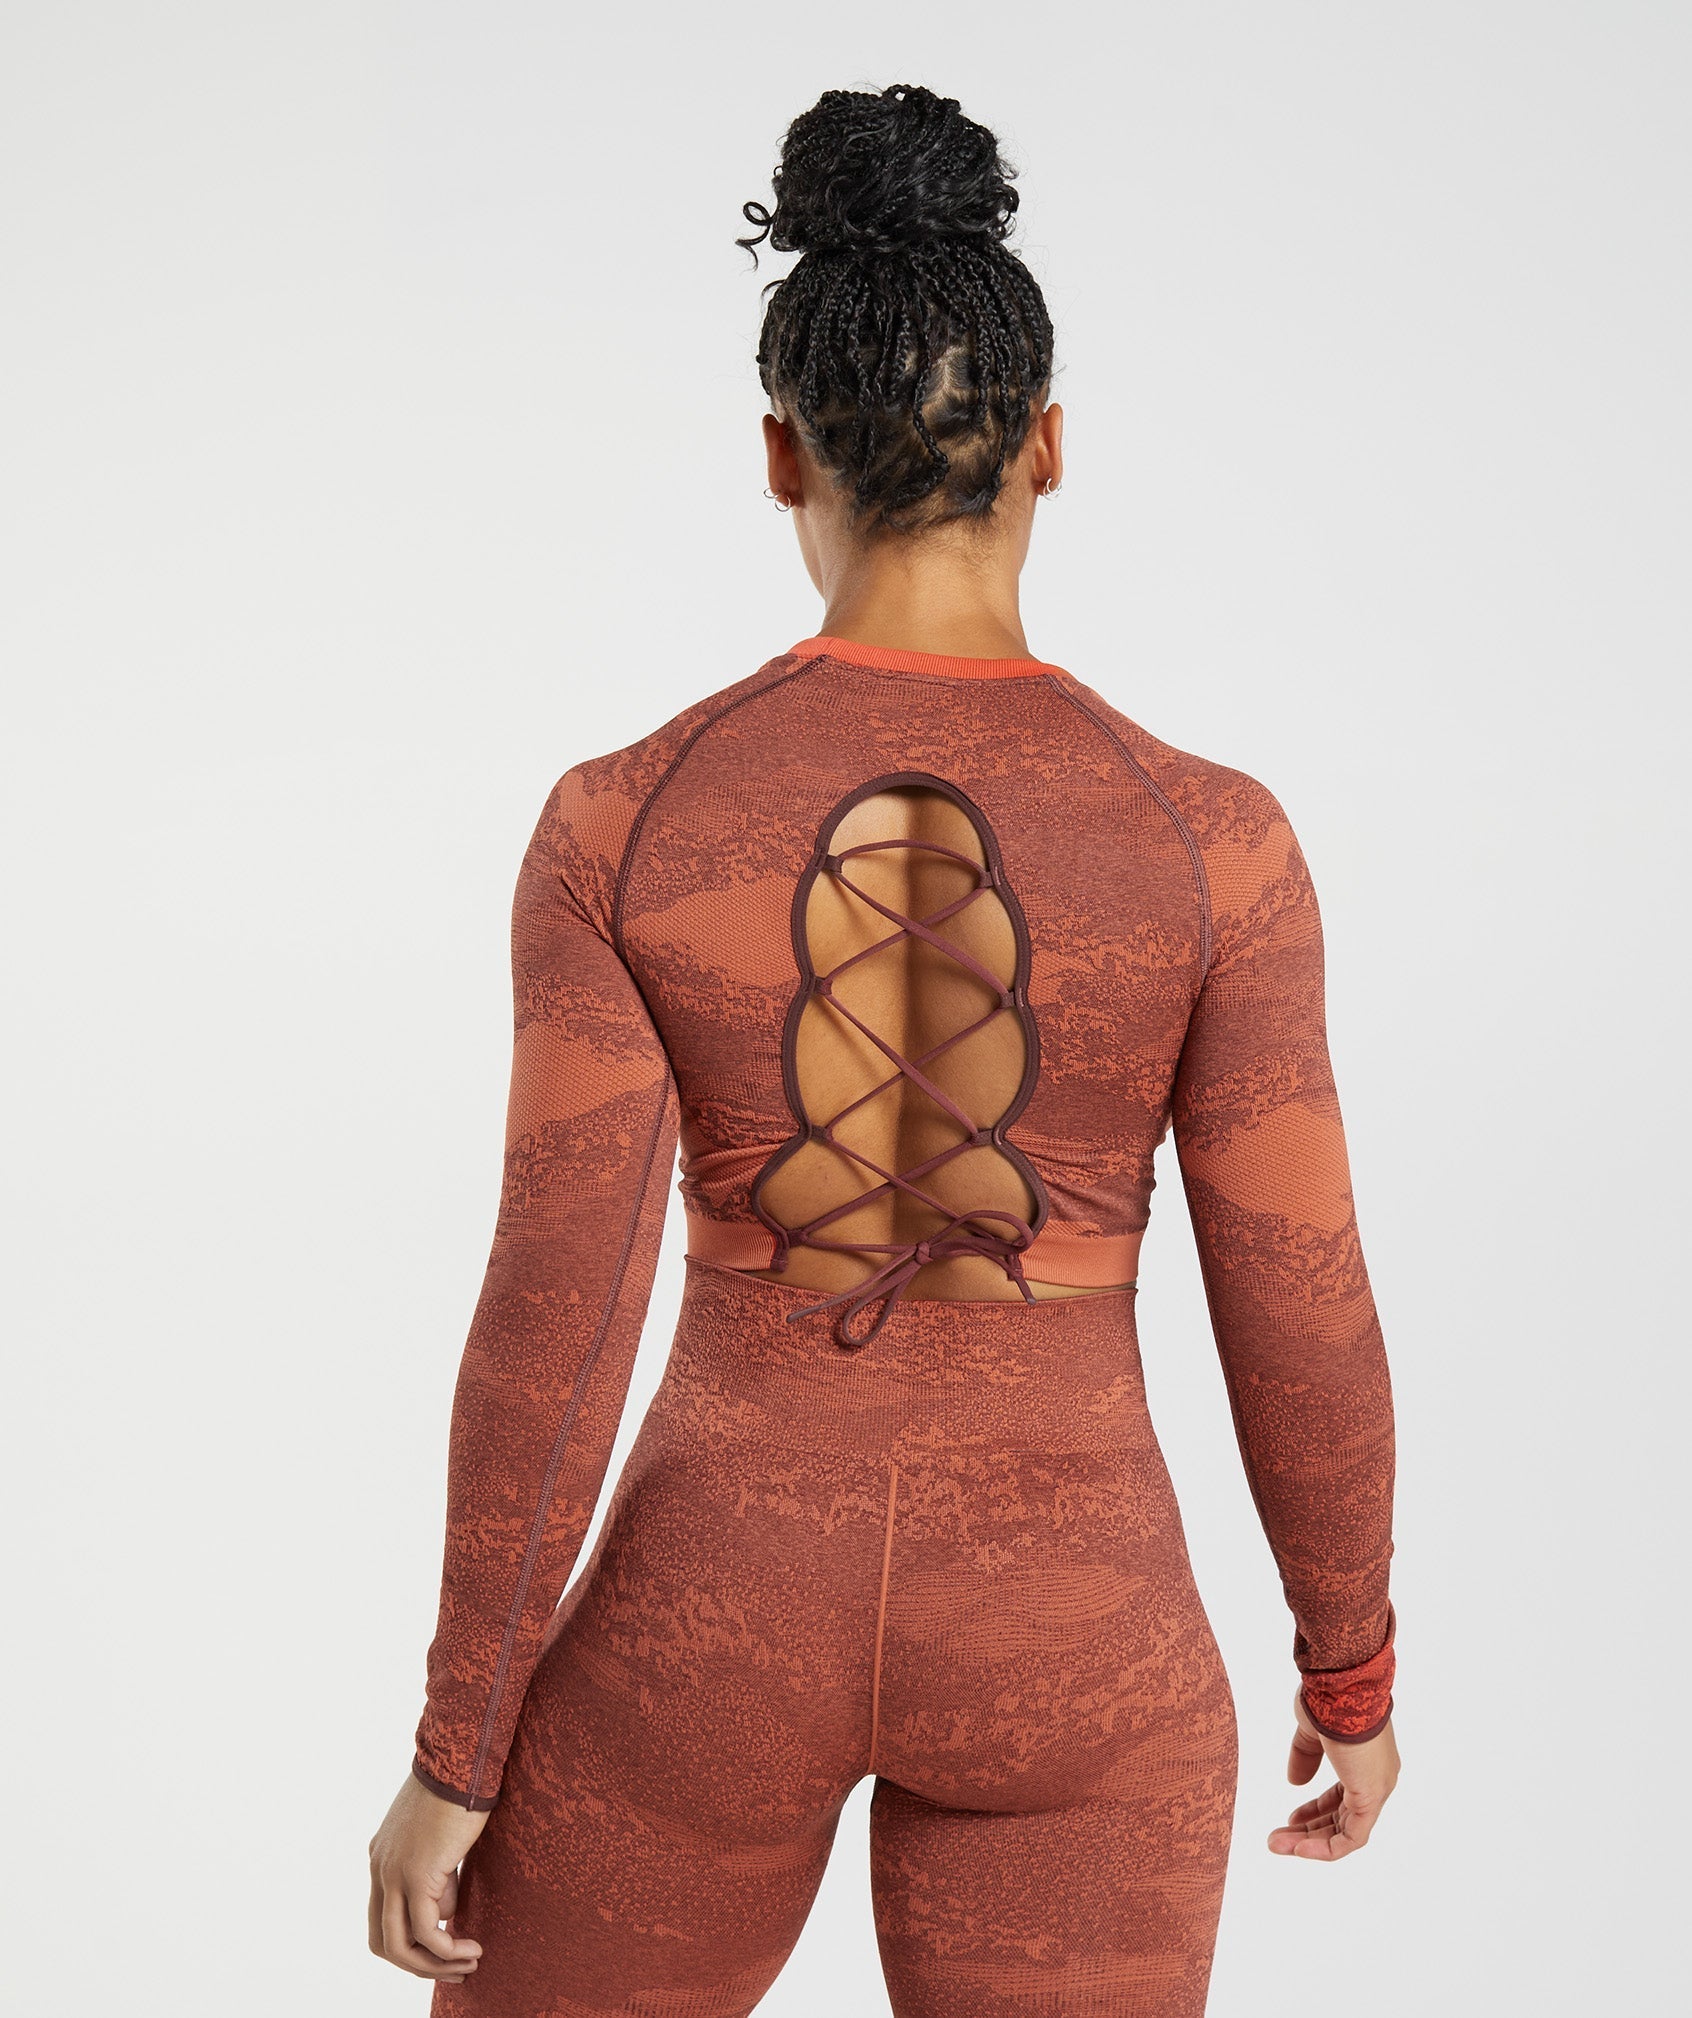 Adapt Camo Seamless Lace Up Back Top in Storm Red/Cherry Brown - view 1